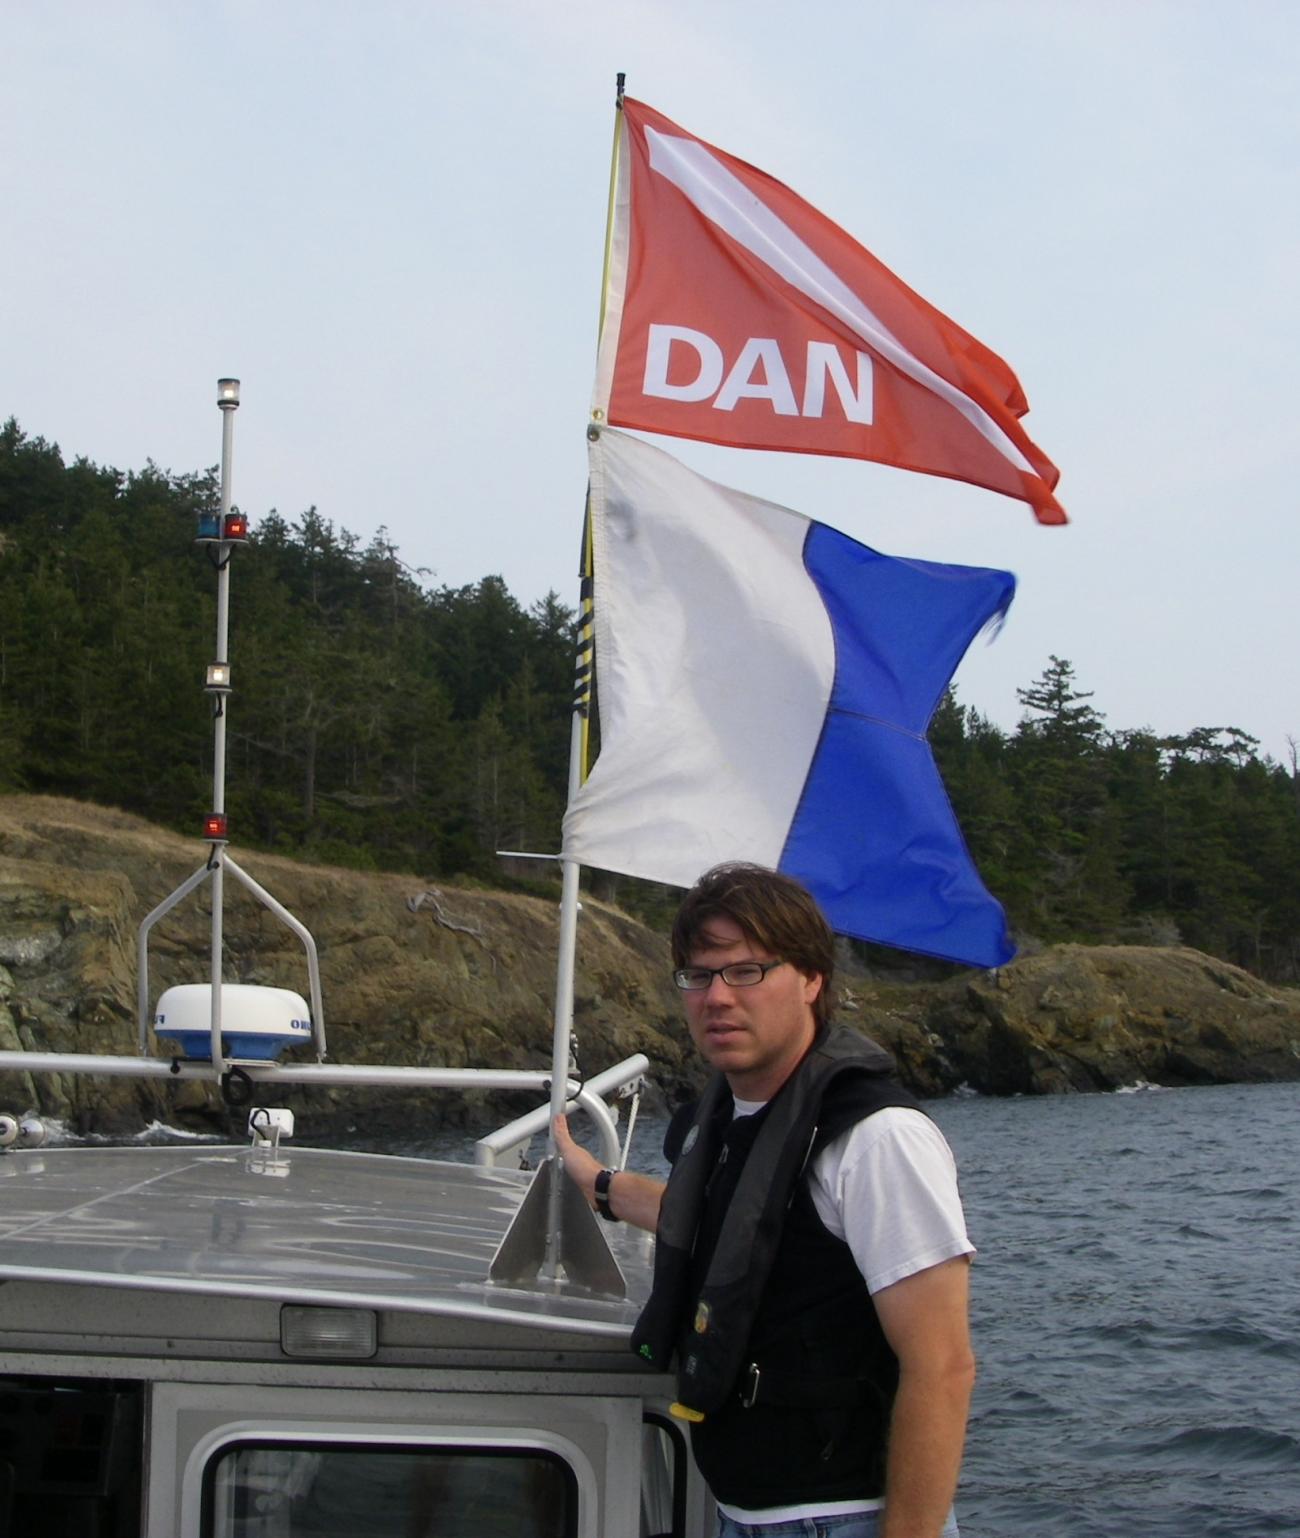 A man standing on a boat holds two flags, one red/white and one white/blue.